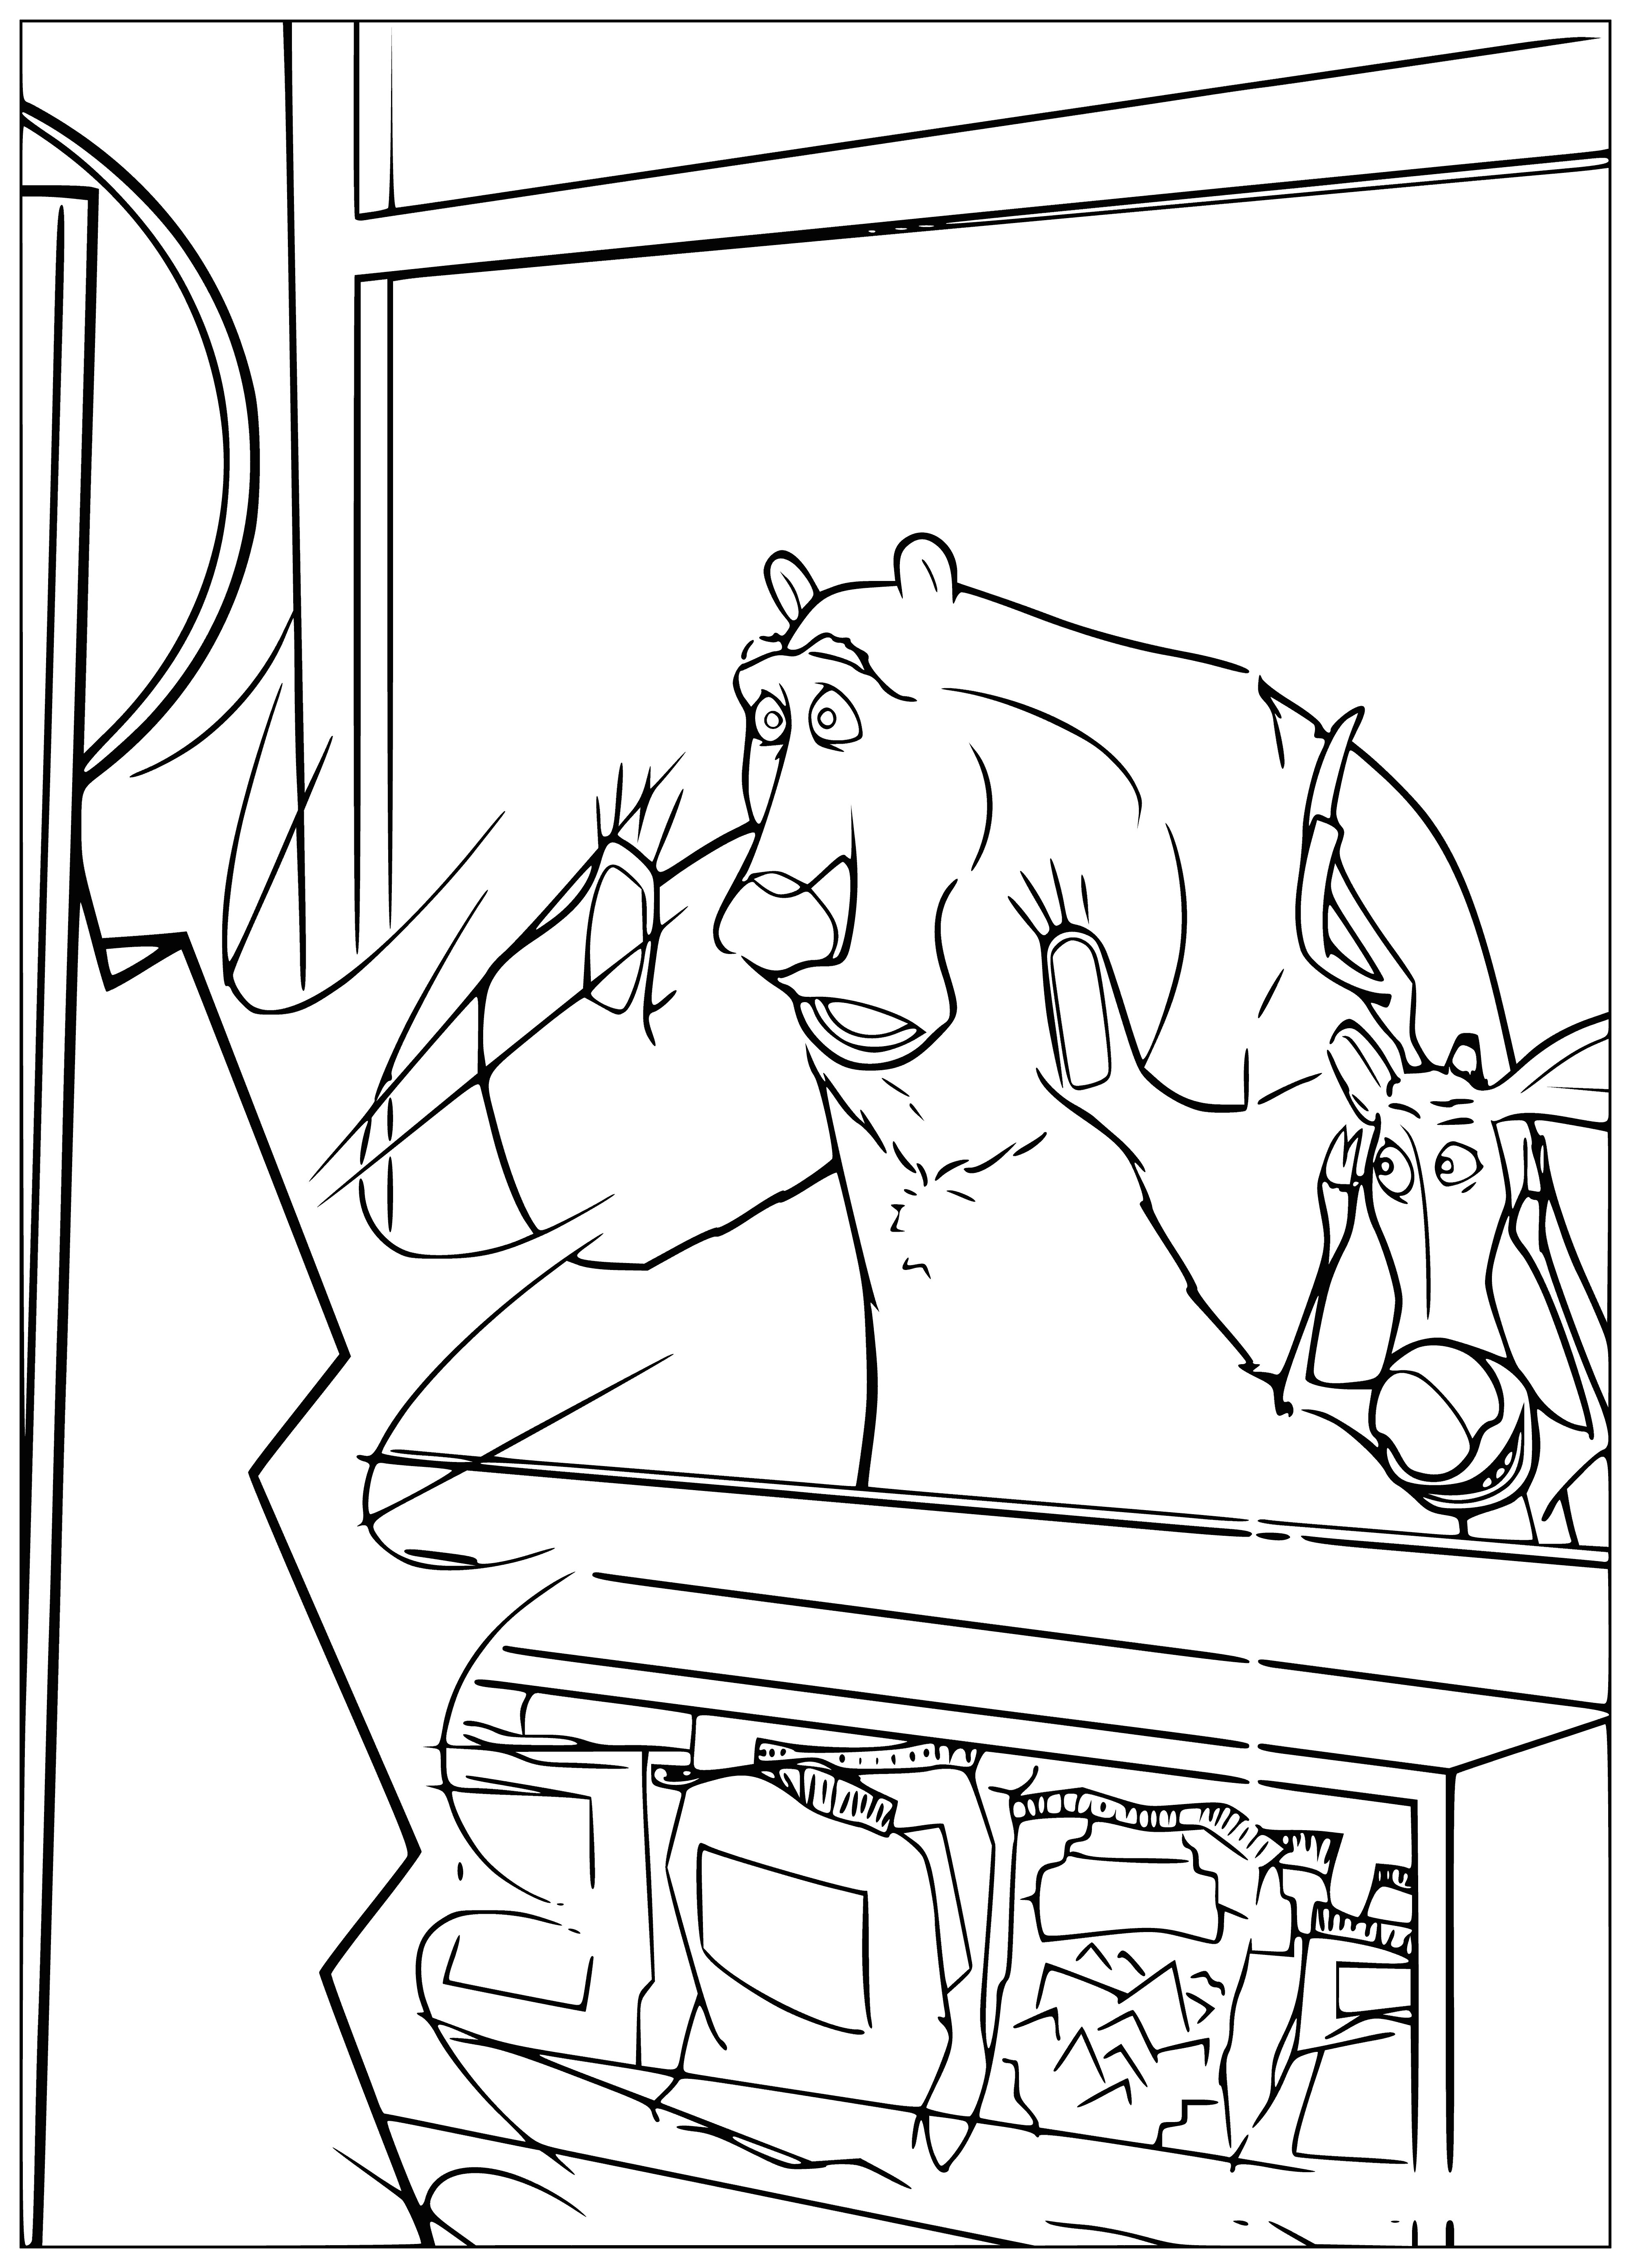 Here they are - yakhushki! coloring page